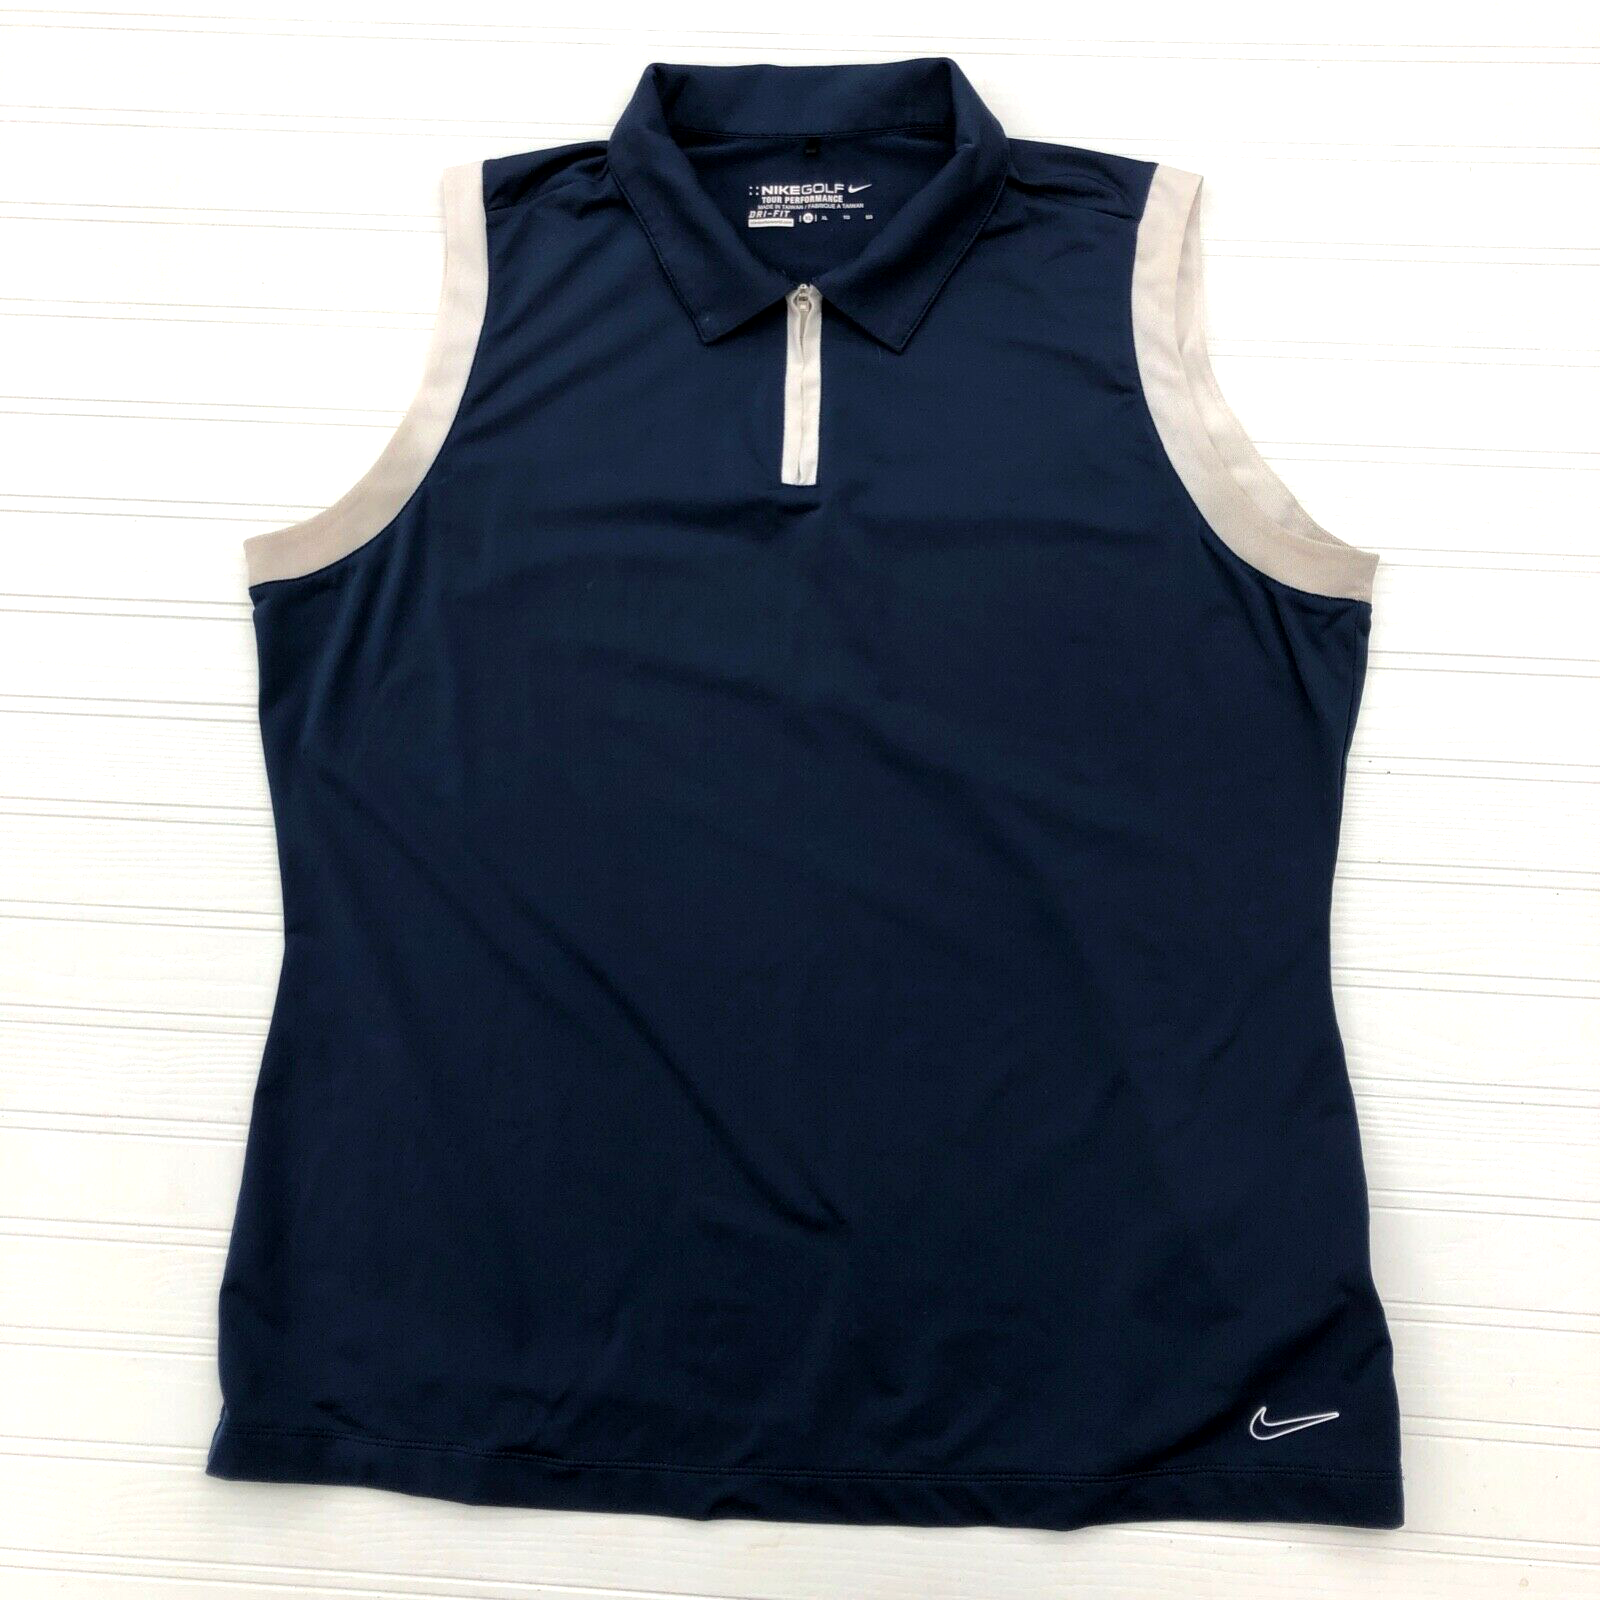 Nike Golf Blue Dri Fit And Tennis Cheap mail order sales Vest Swoosh Overseas parallel import regular item Logo Si Adult